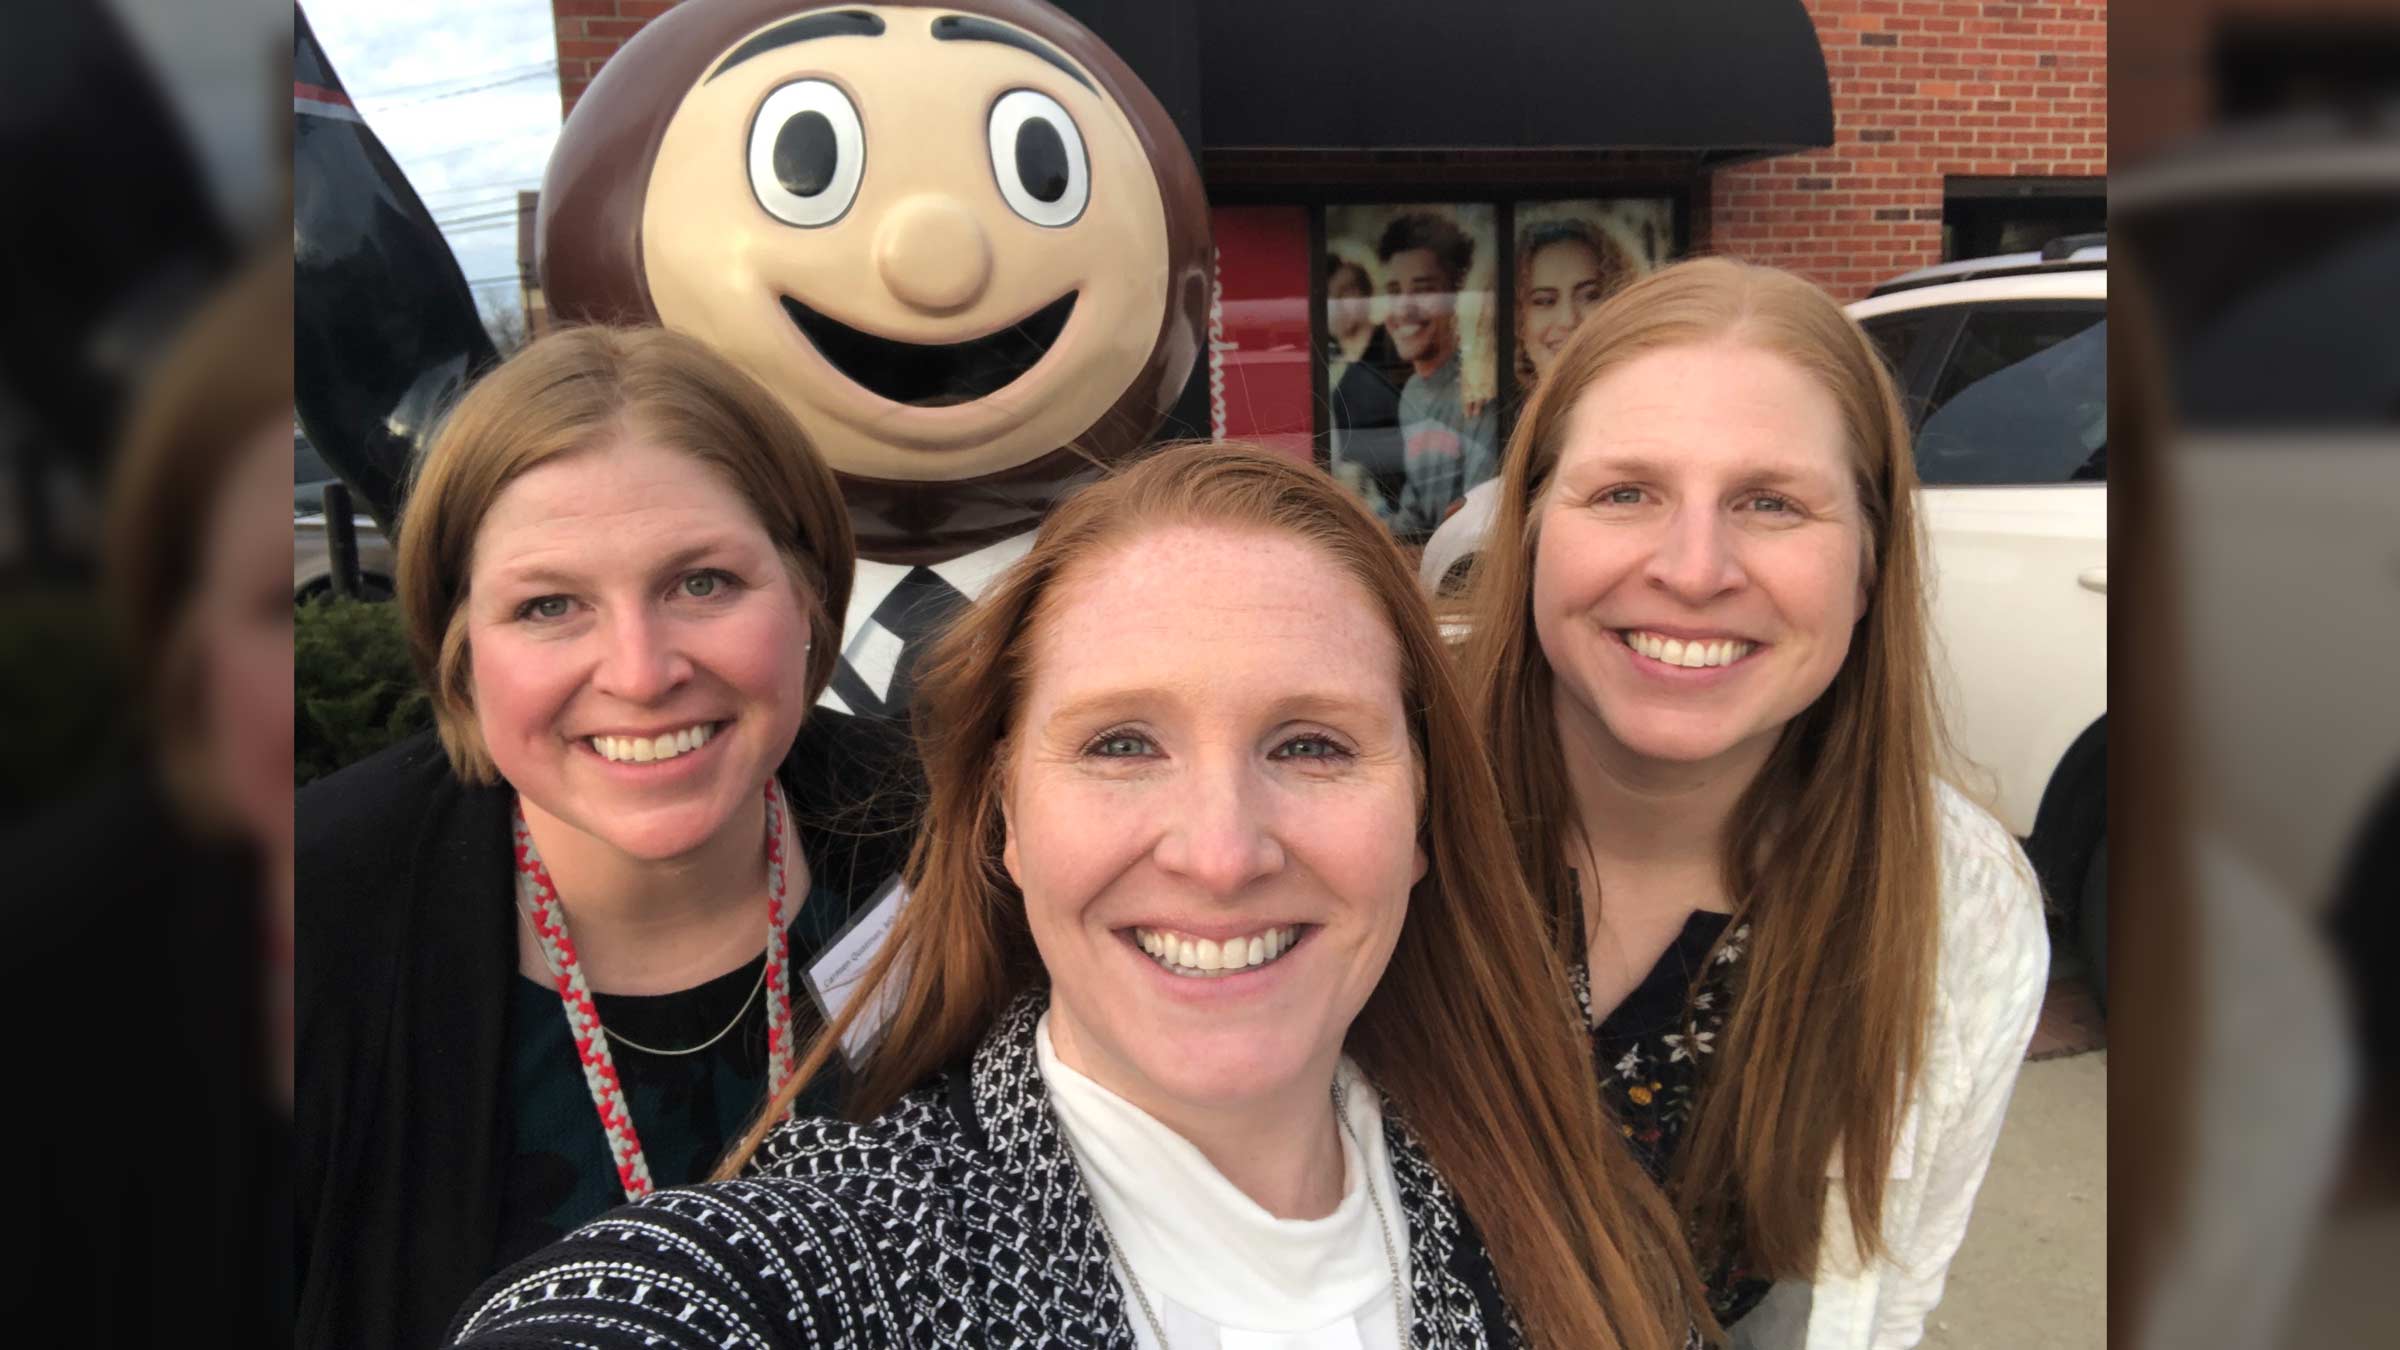 The Quatman sisters with Brutus